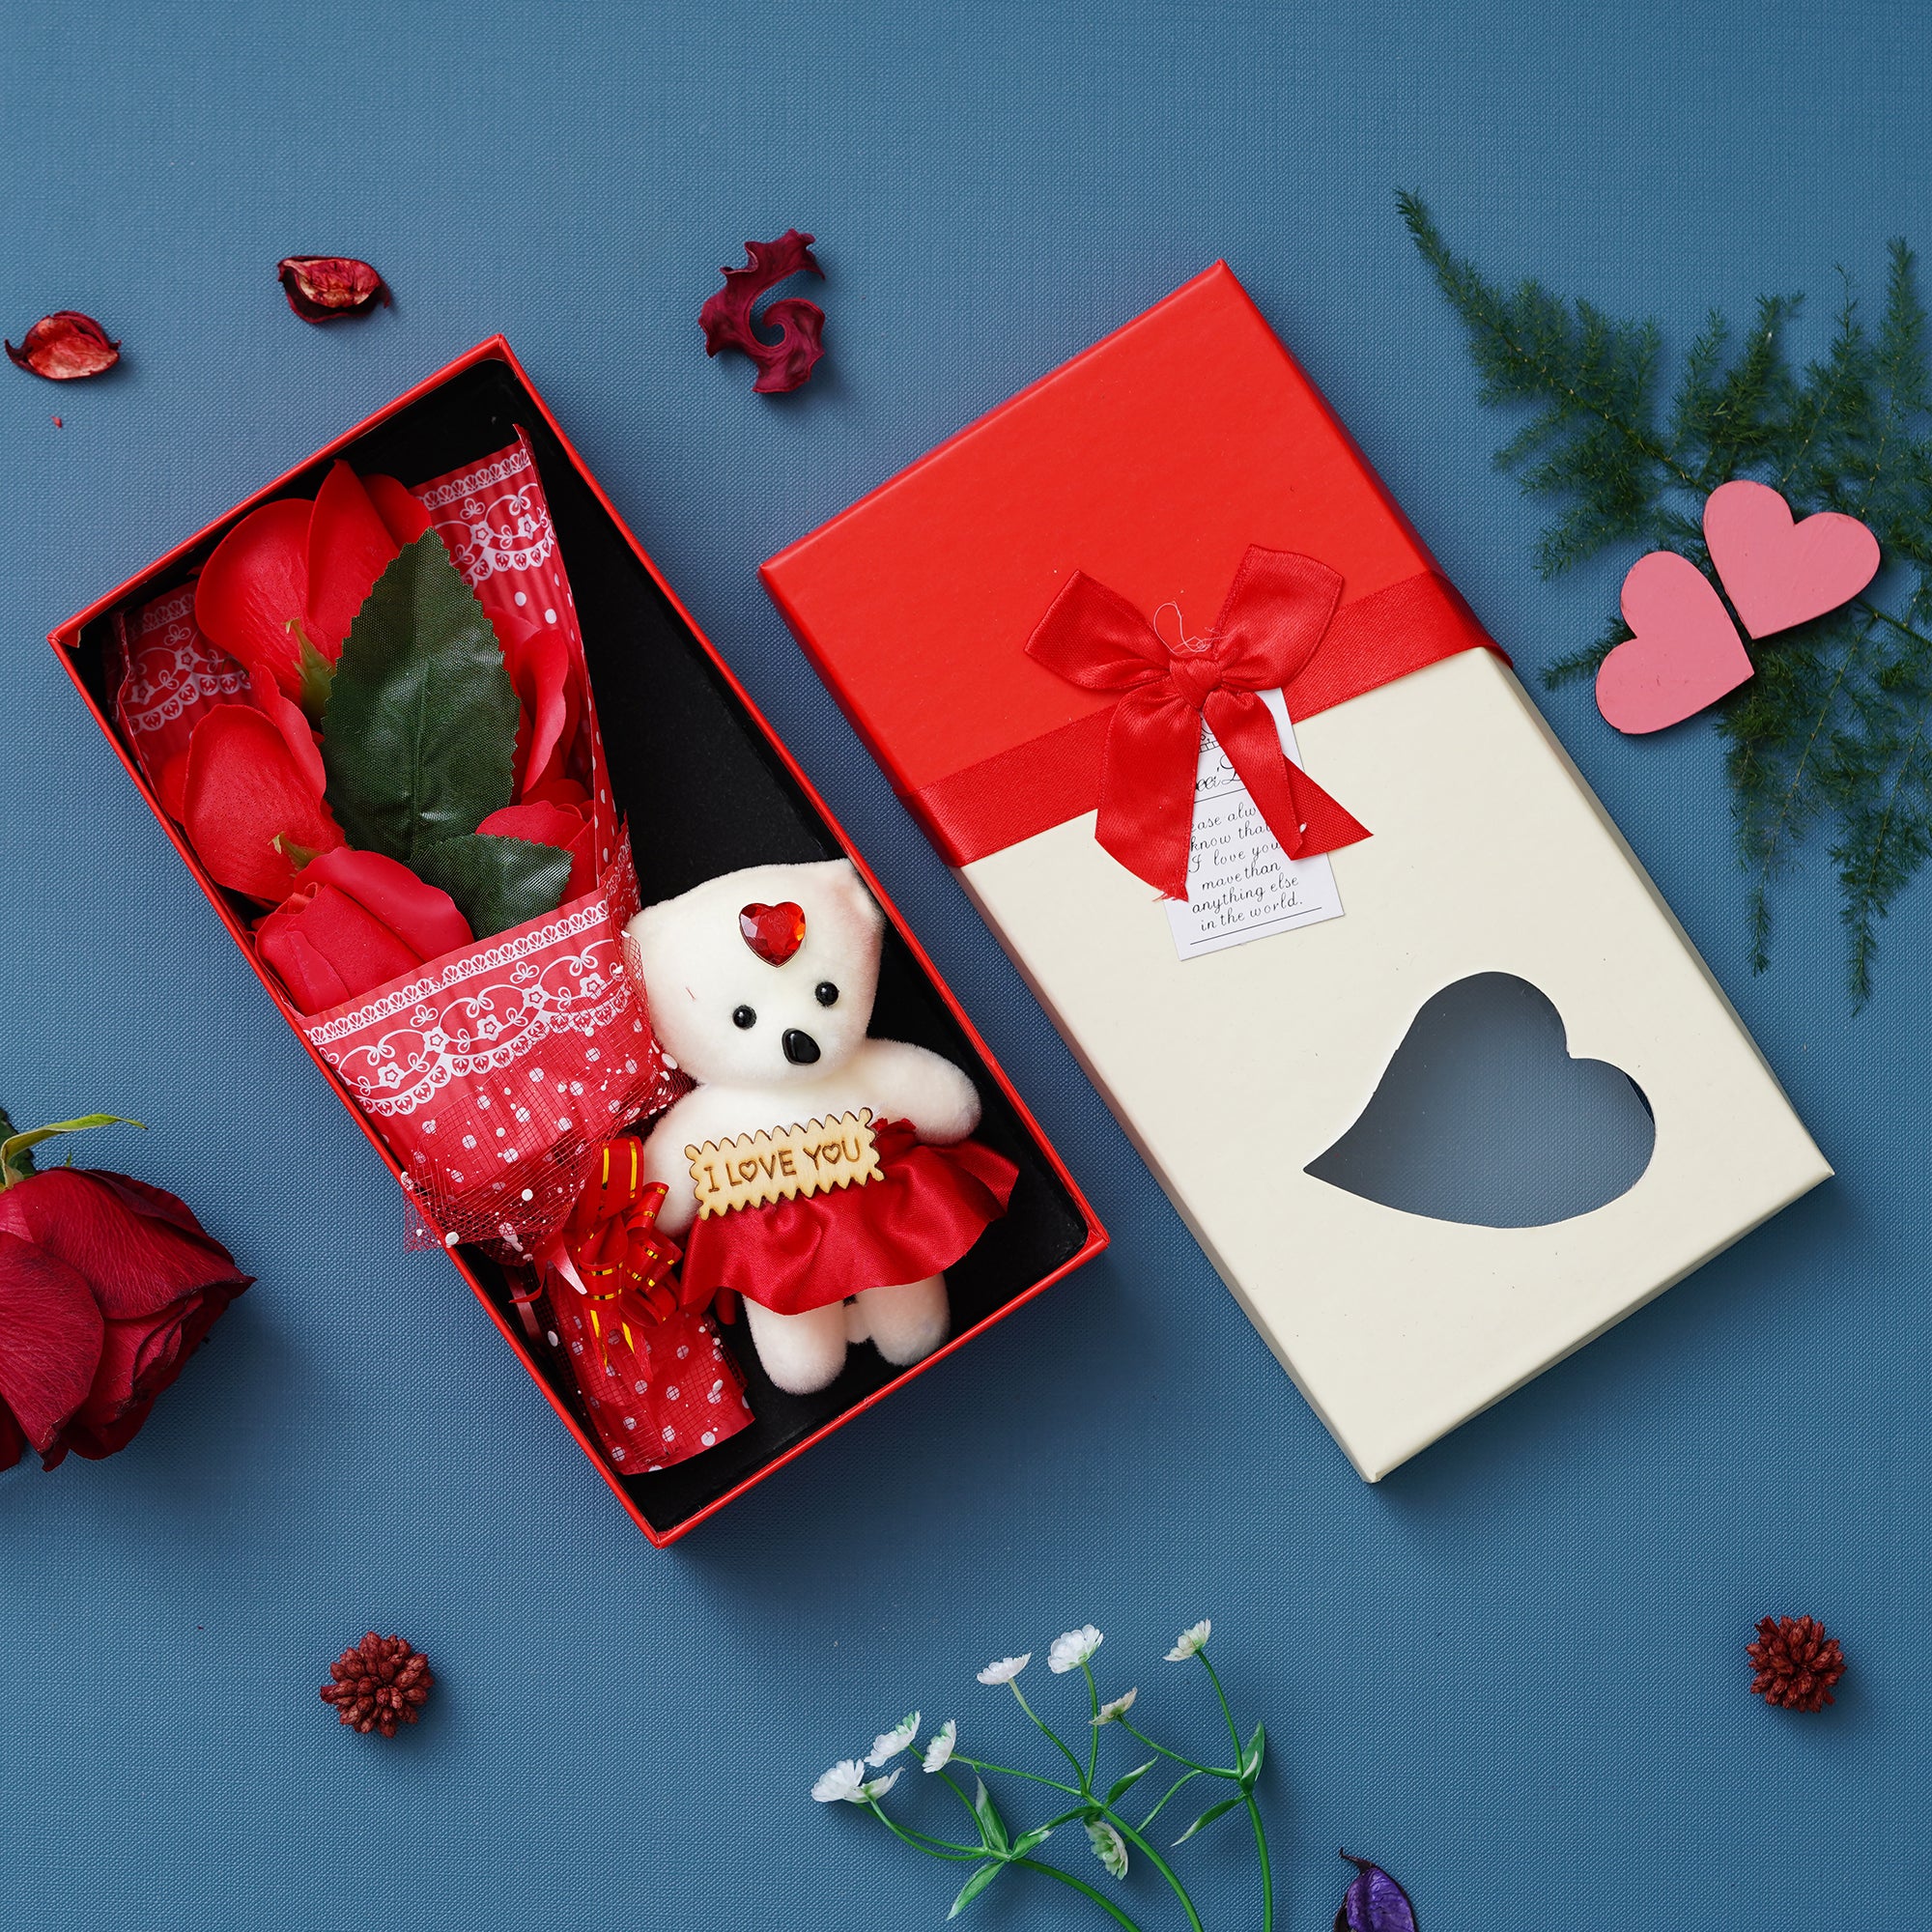 Valentine Combo of Pack of 8 Love Gift Cards, Red Roses Bouquet and White, Red Teddy Bear Valentine's Rectangle Shaped Gift Box, Wooden Box "For You" Message Bottle Set 3